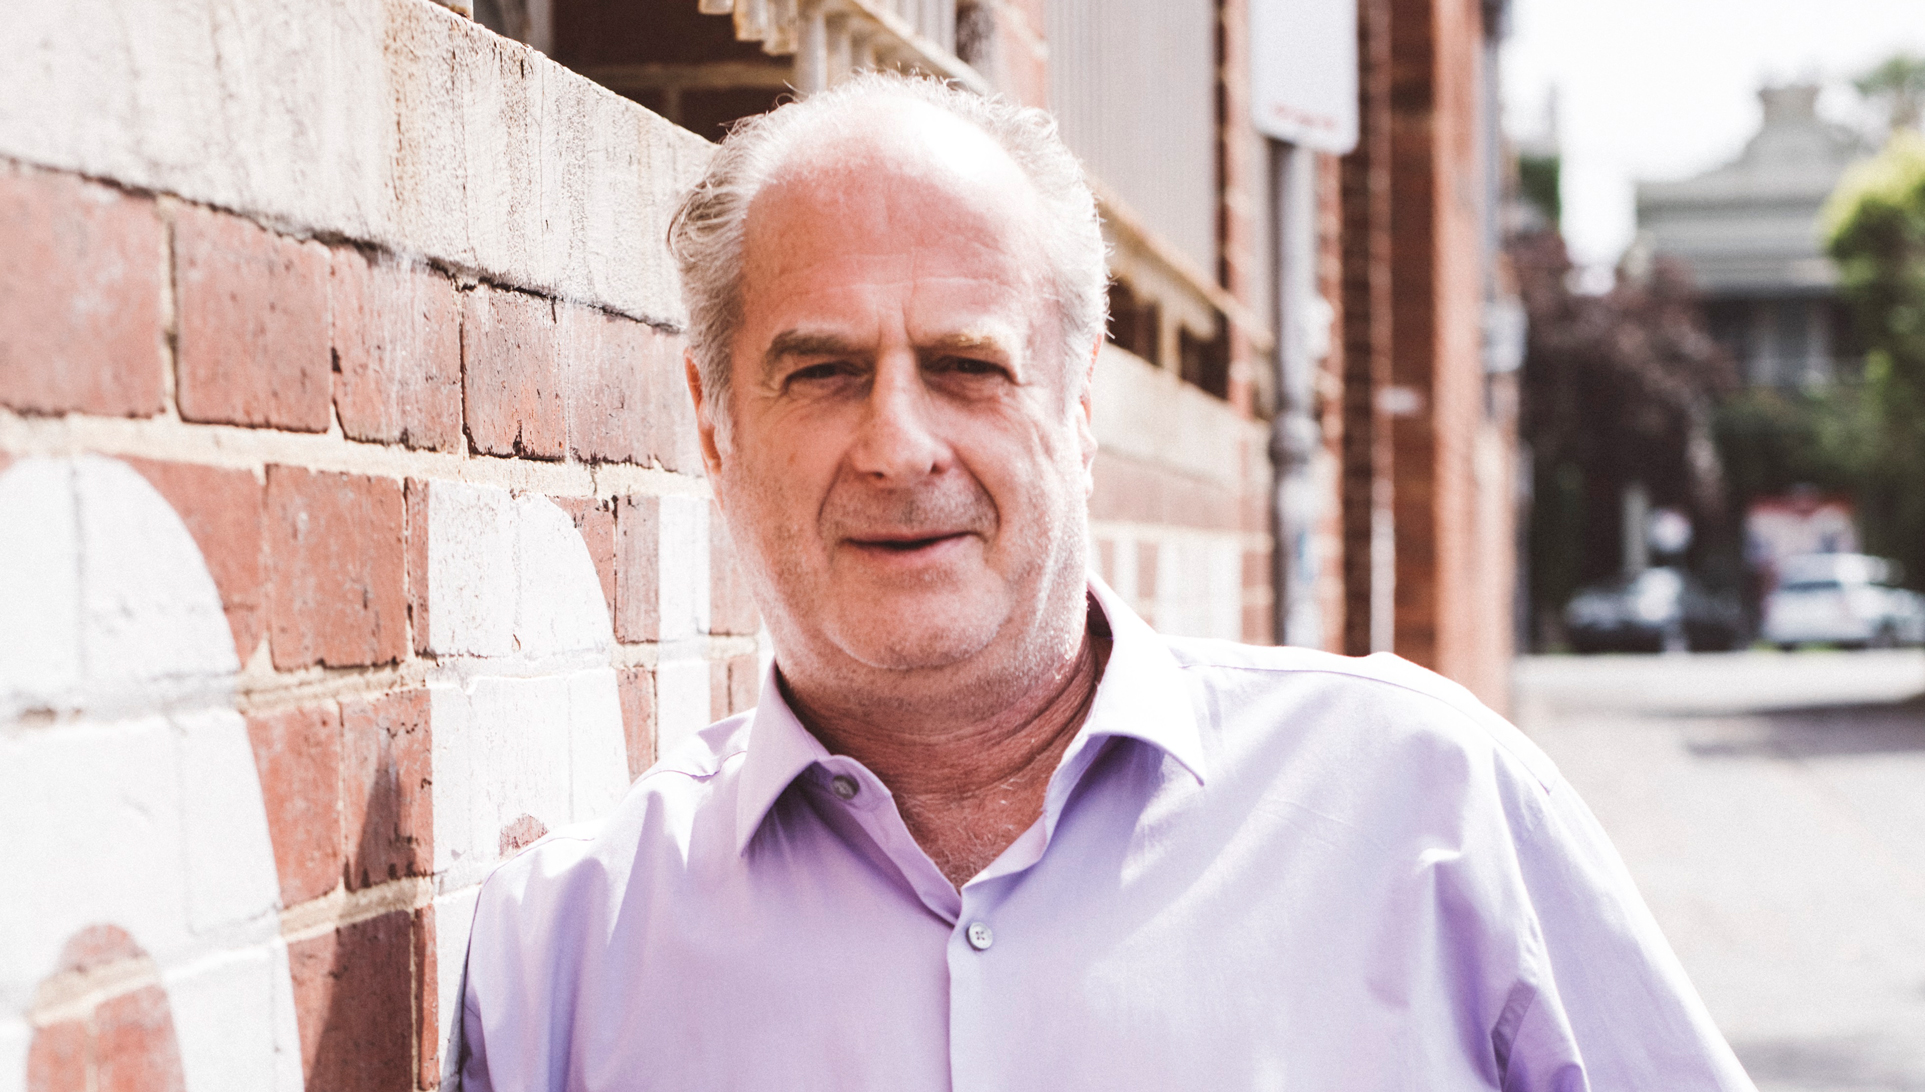 Gudinski to discuss journey to the top at Entertainment Marketing Summit